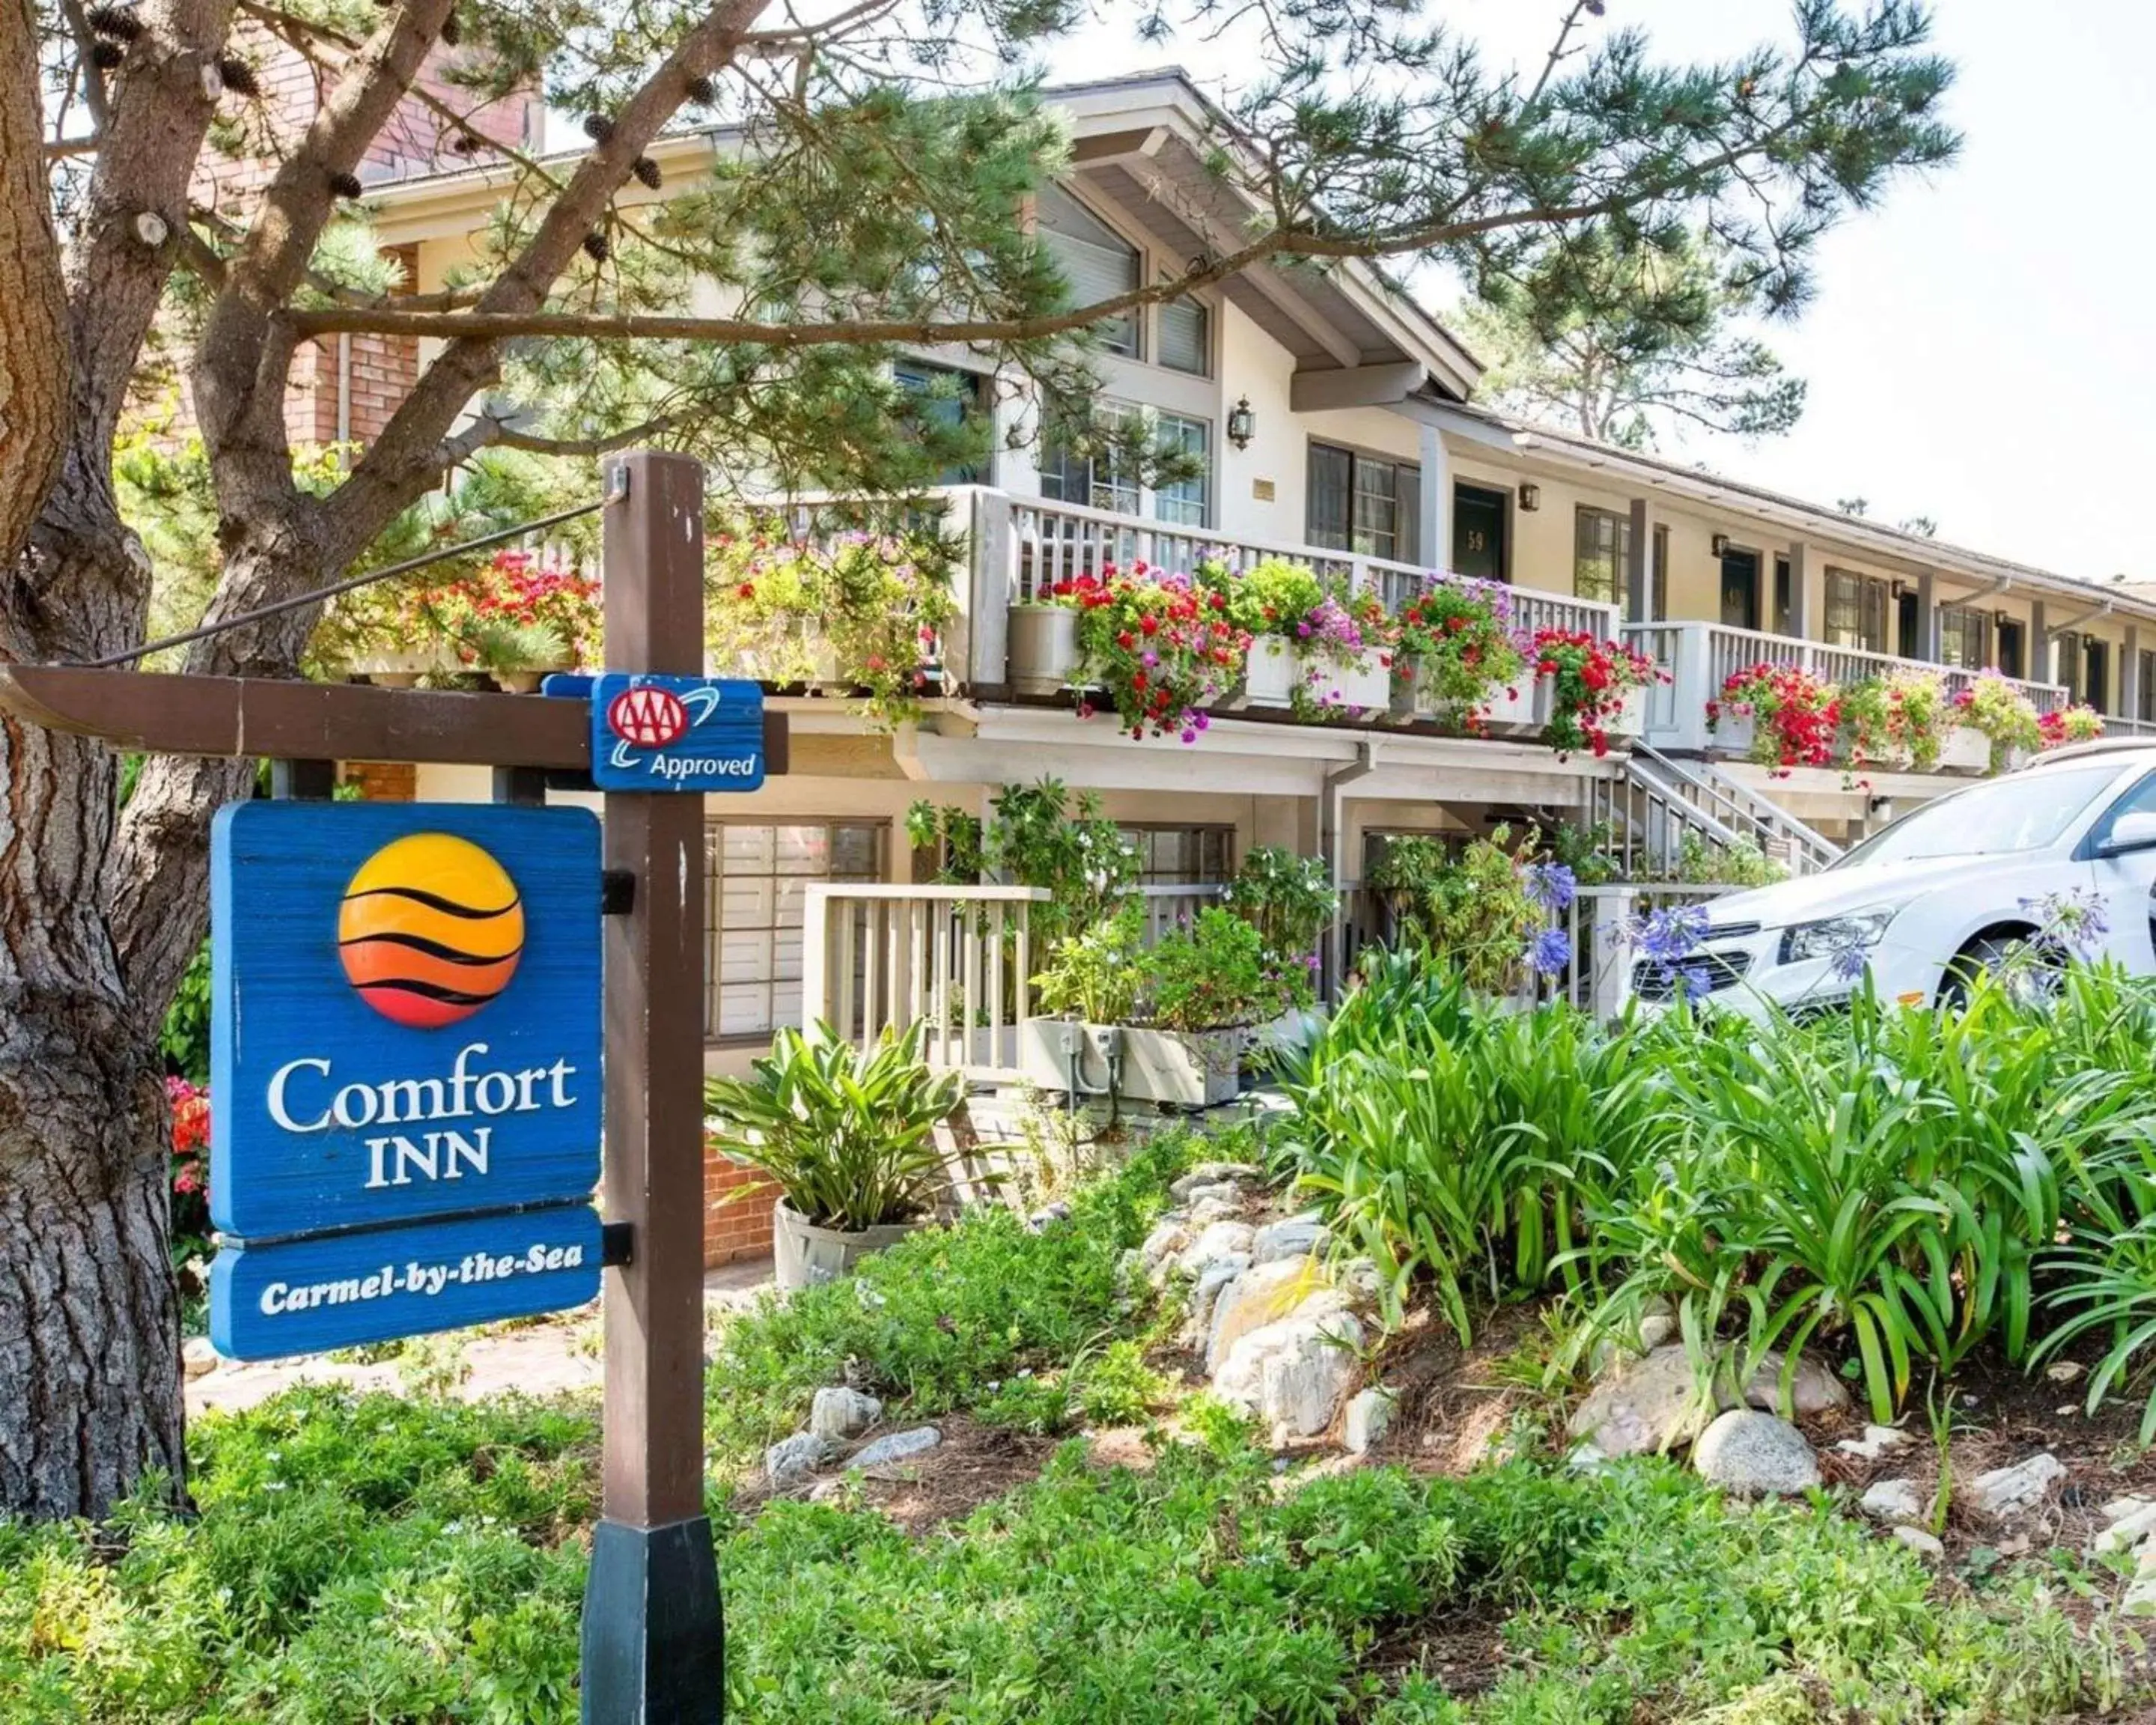 Property building in Comfort Inn Carmel By the Sea